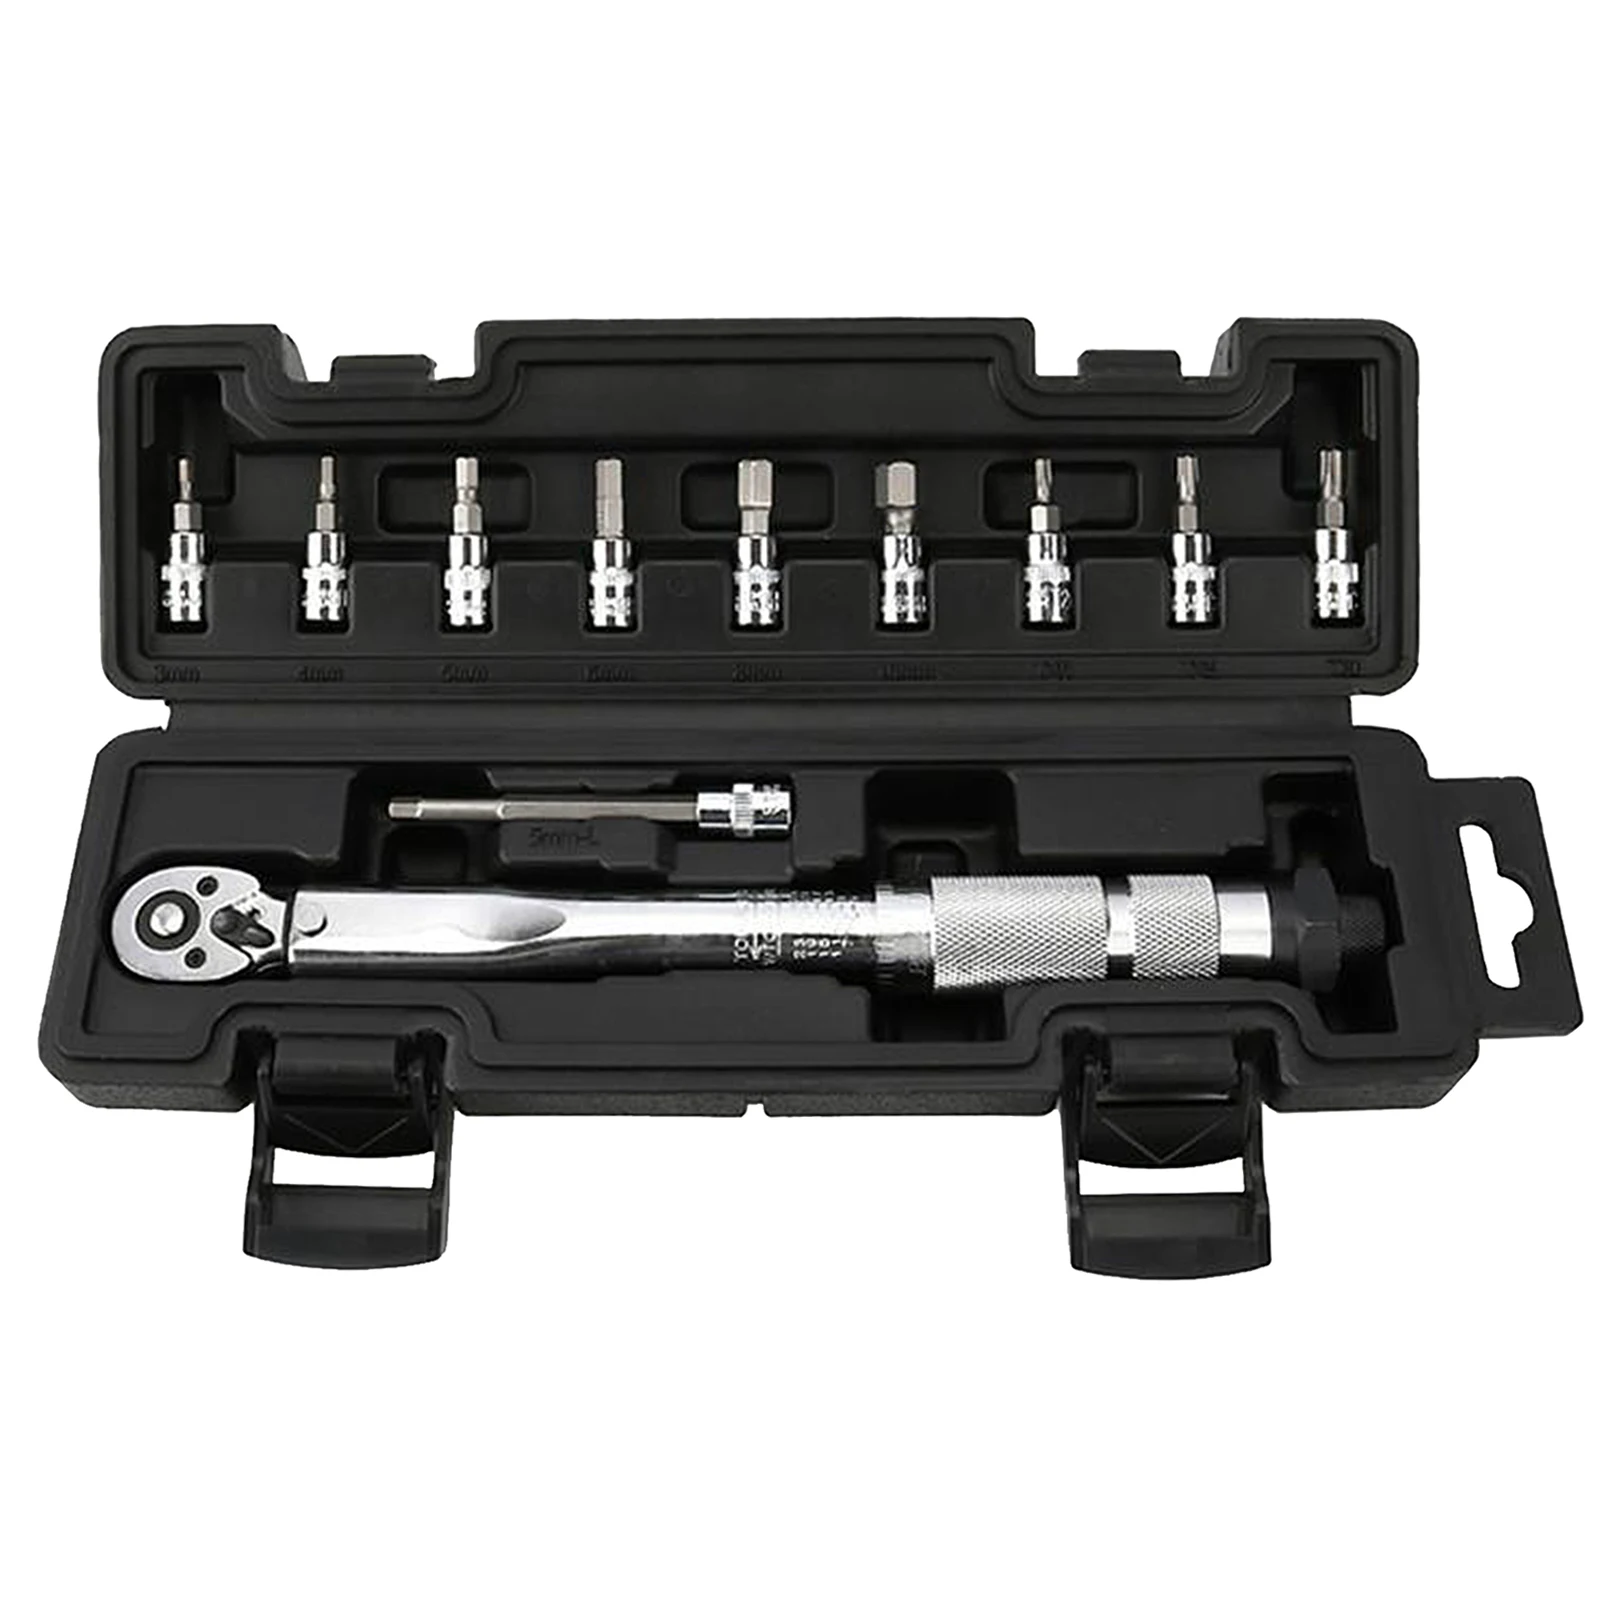 1/4 inch Drive 5-25 Nm Torque Wrench Set,High Accuracy Convenient Bike Multitool